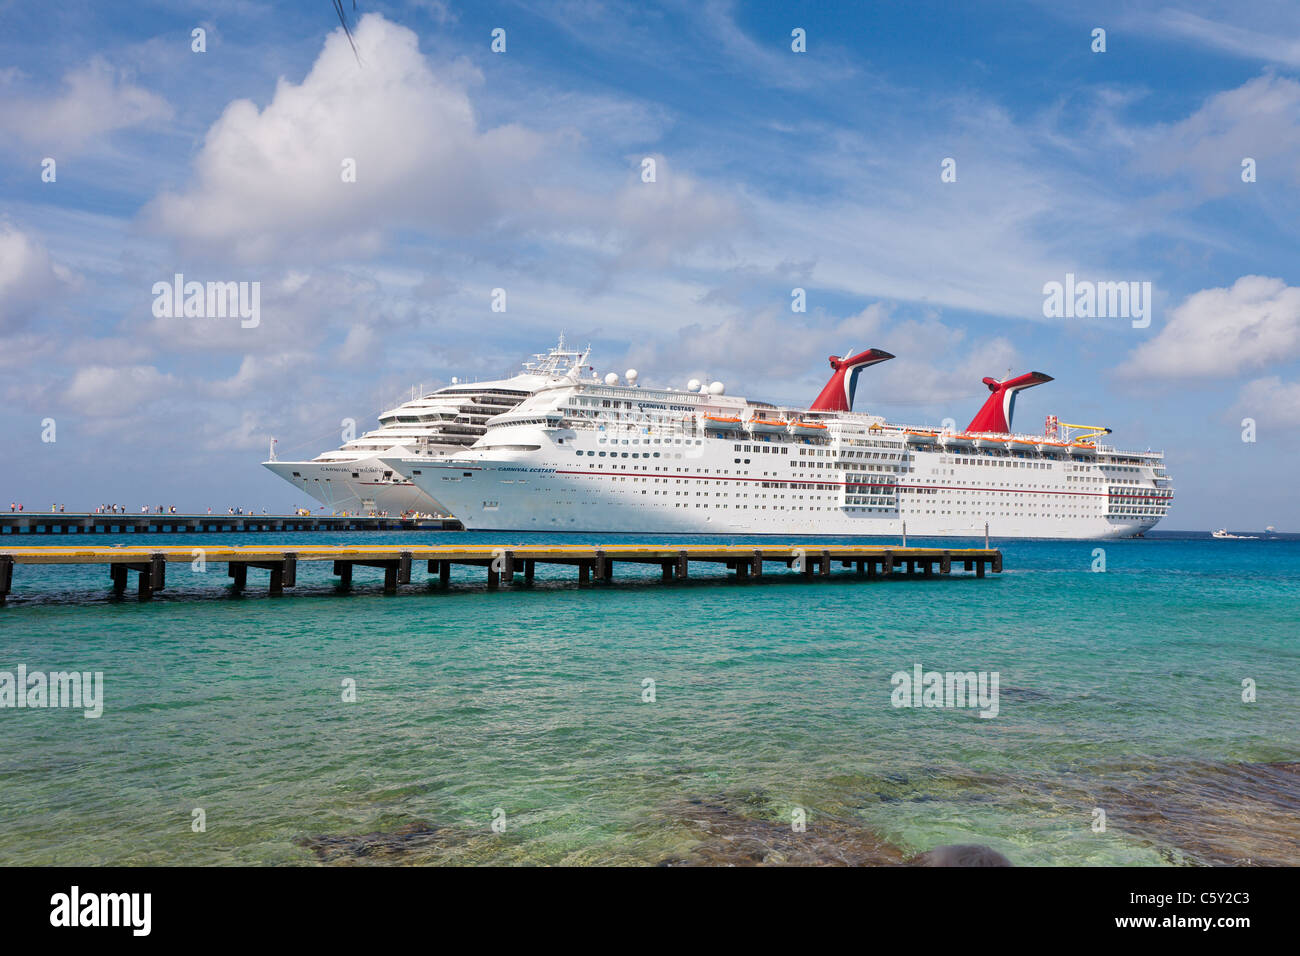 Cruise ship passengers on pier disembarking from Carnival cruise ships Triumph and Ecstasy in Cozumel, Mexico Stock Photo